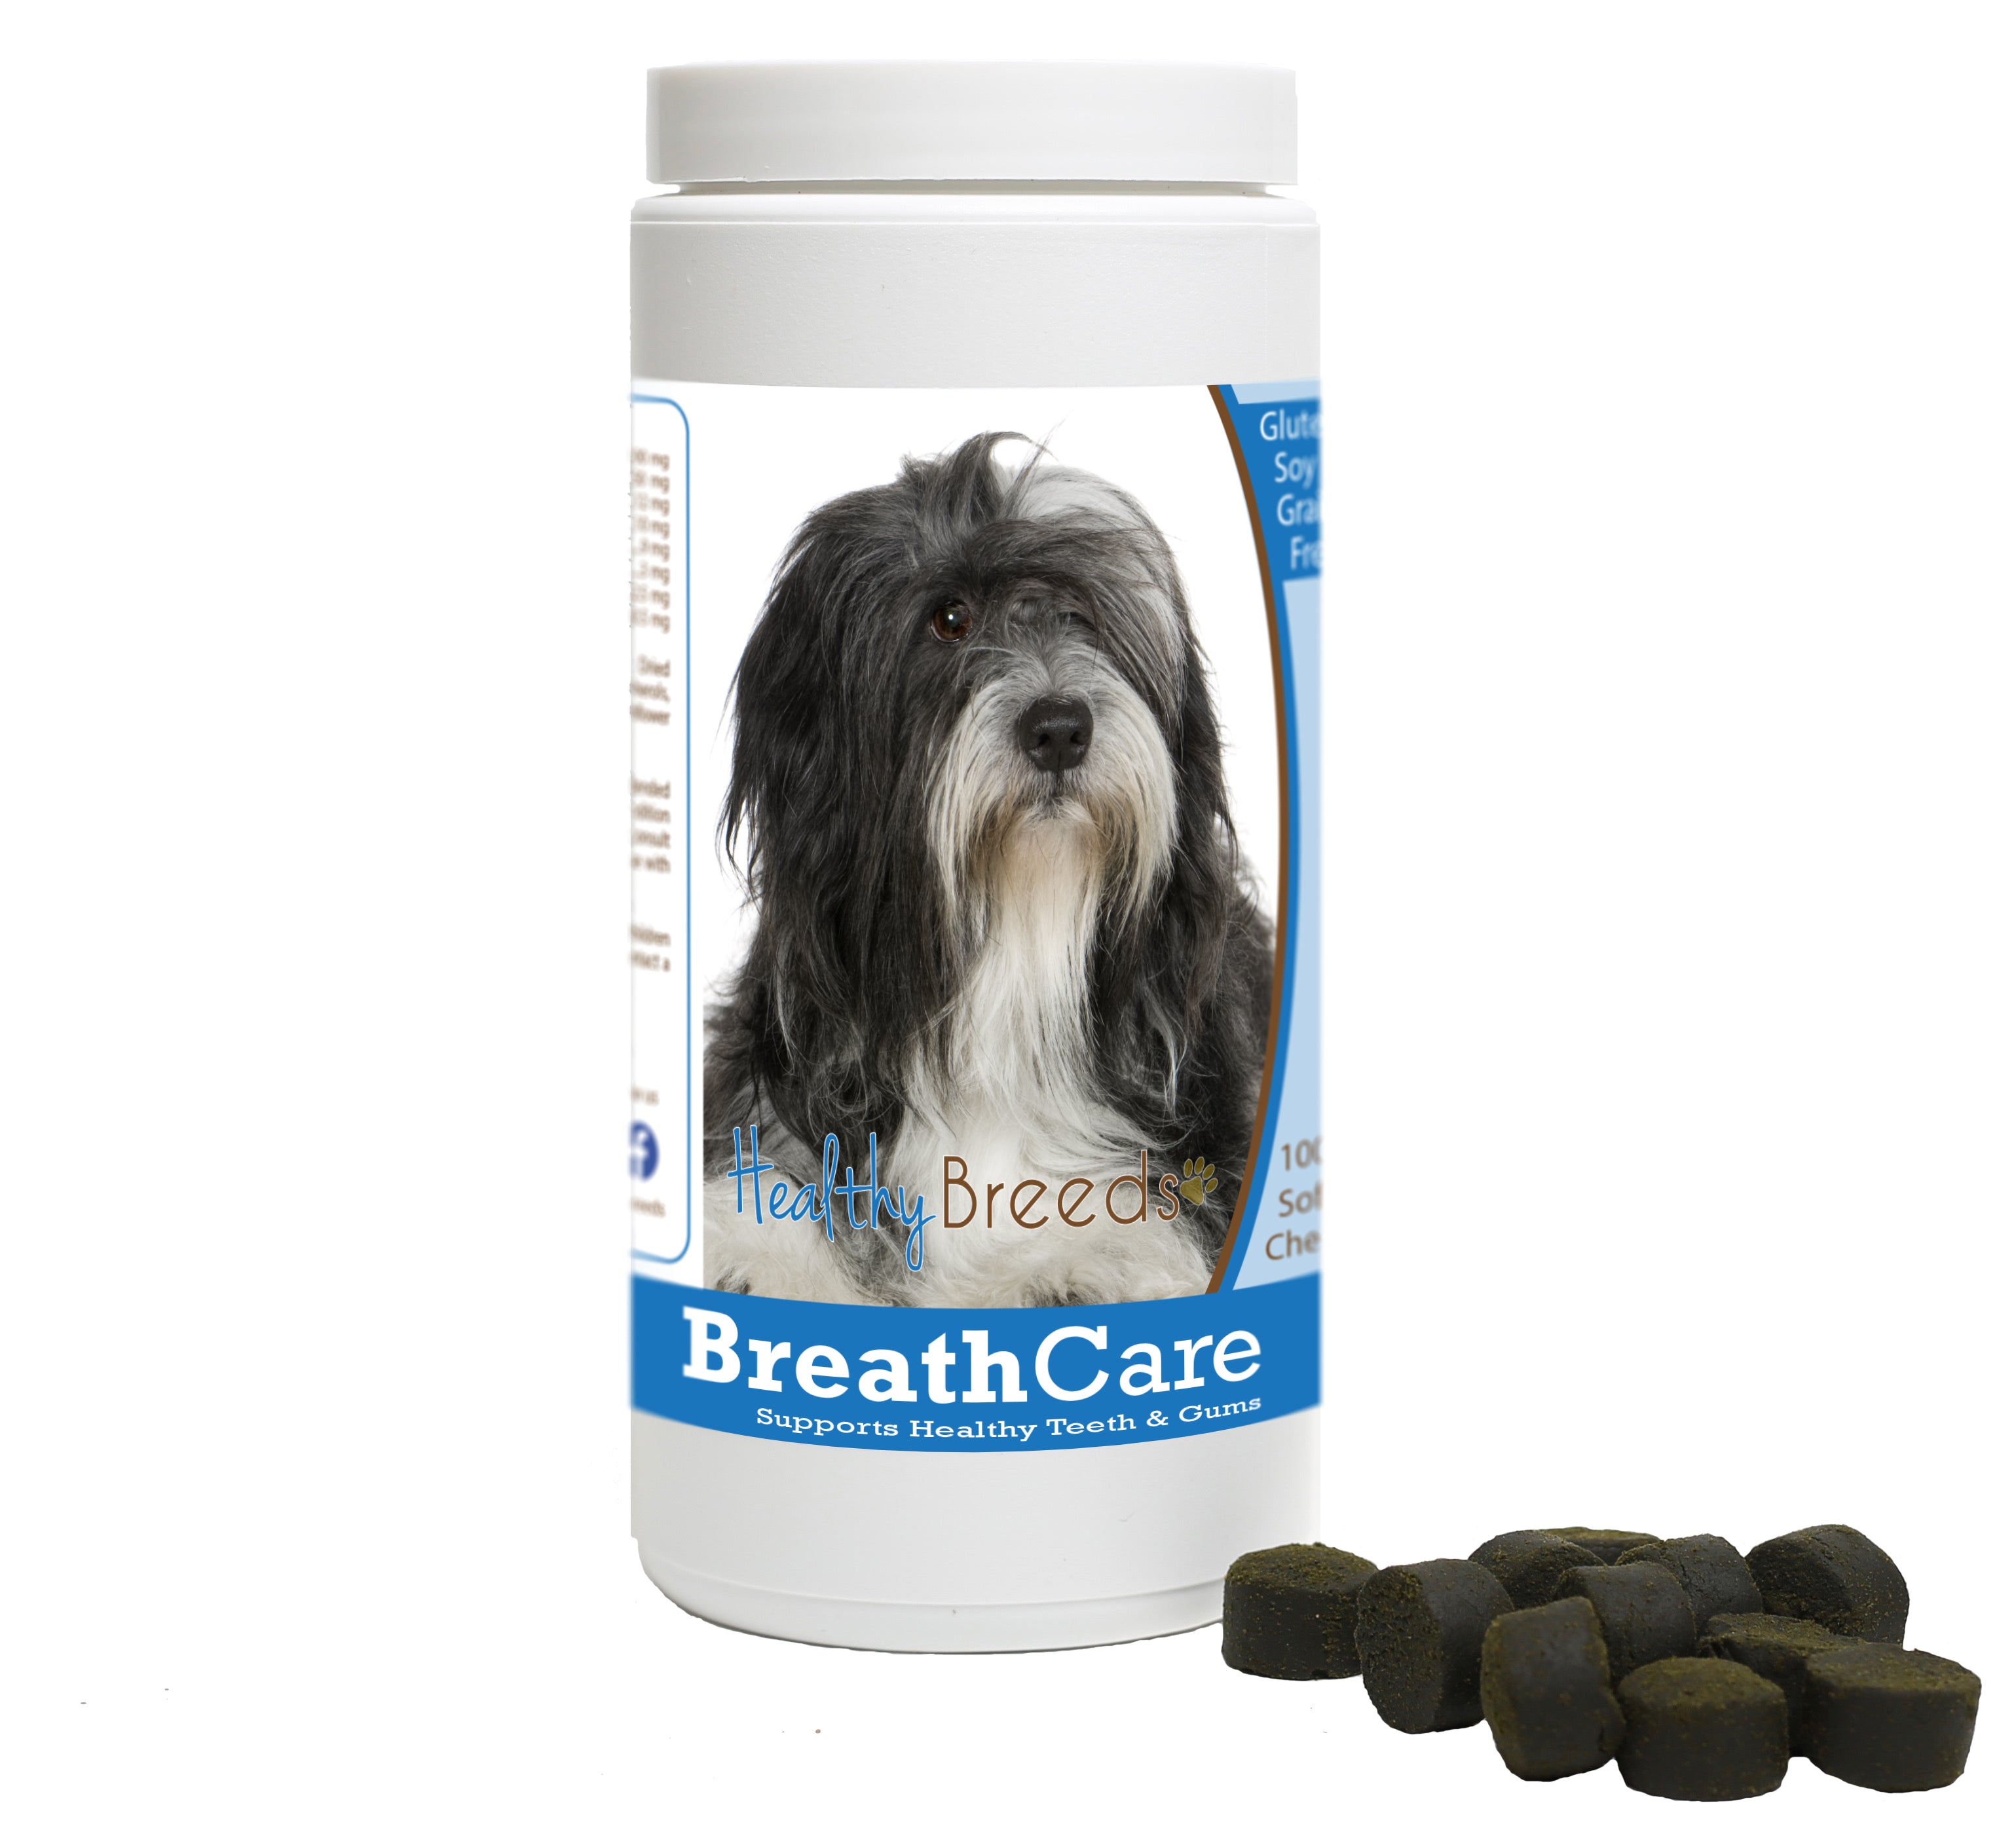 Lhasa Apso Breath Care Soft Chews for Dogs 60 Count